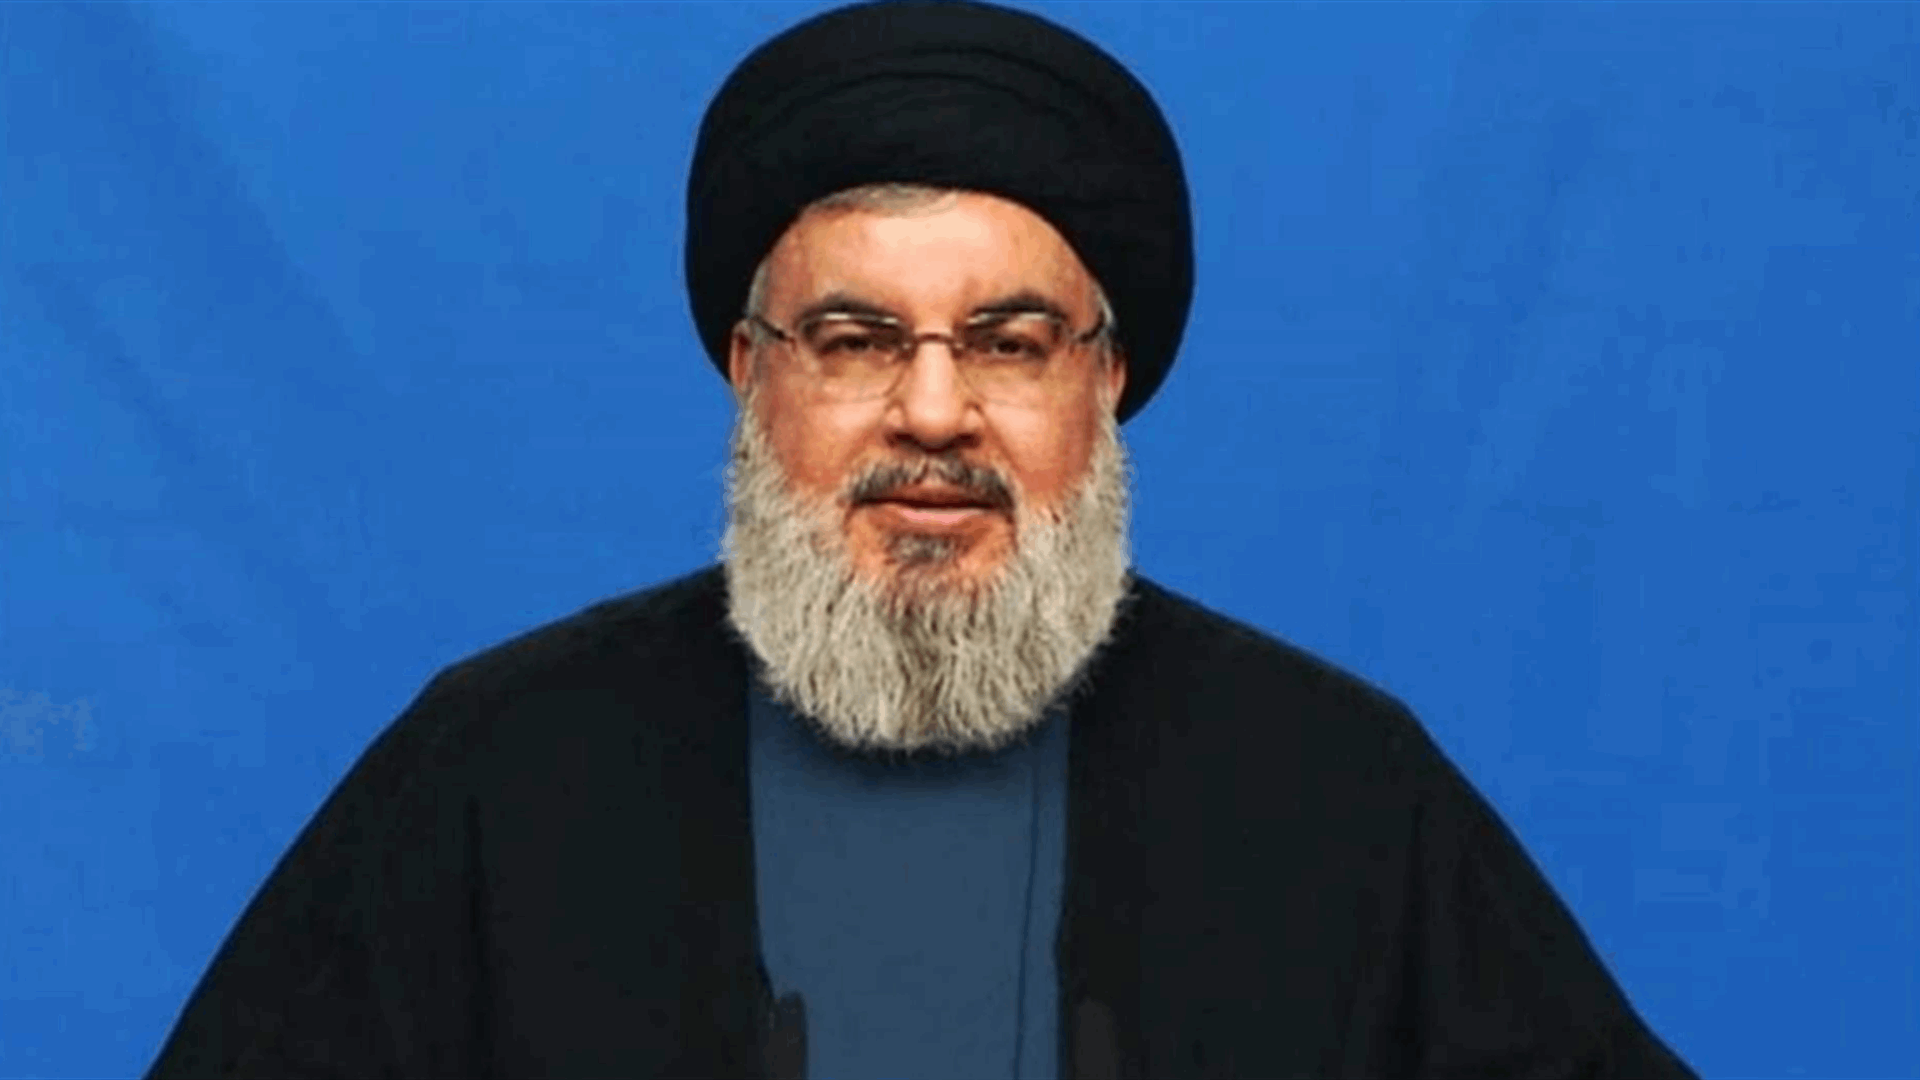 Sayyed Hassan Nasrallah emphasizes focus on internal issues in presidential elections